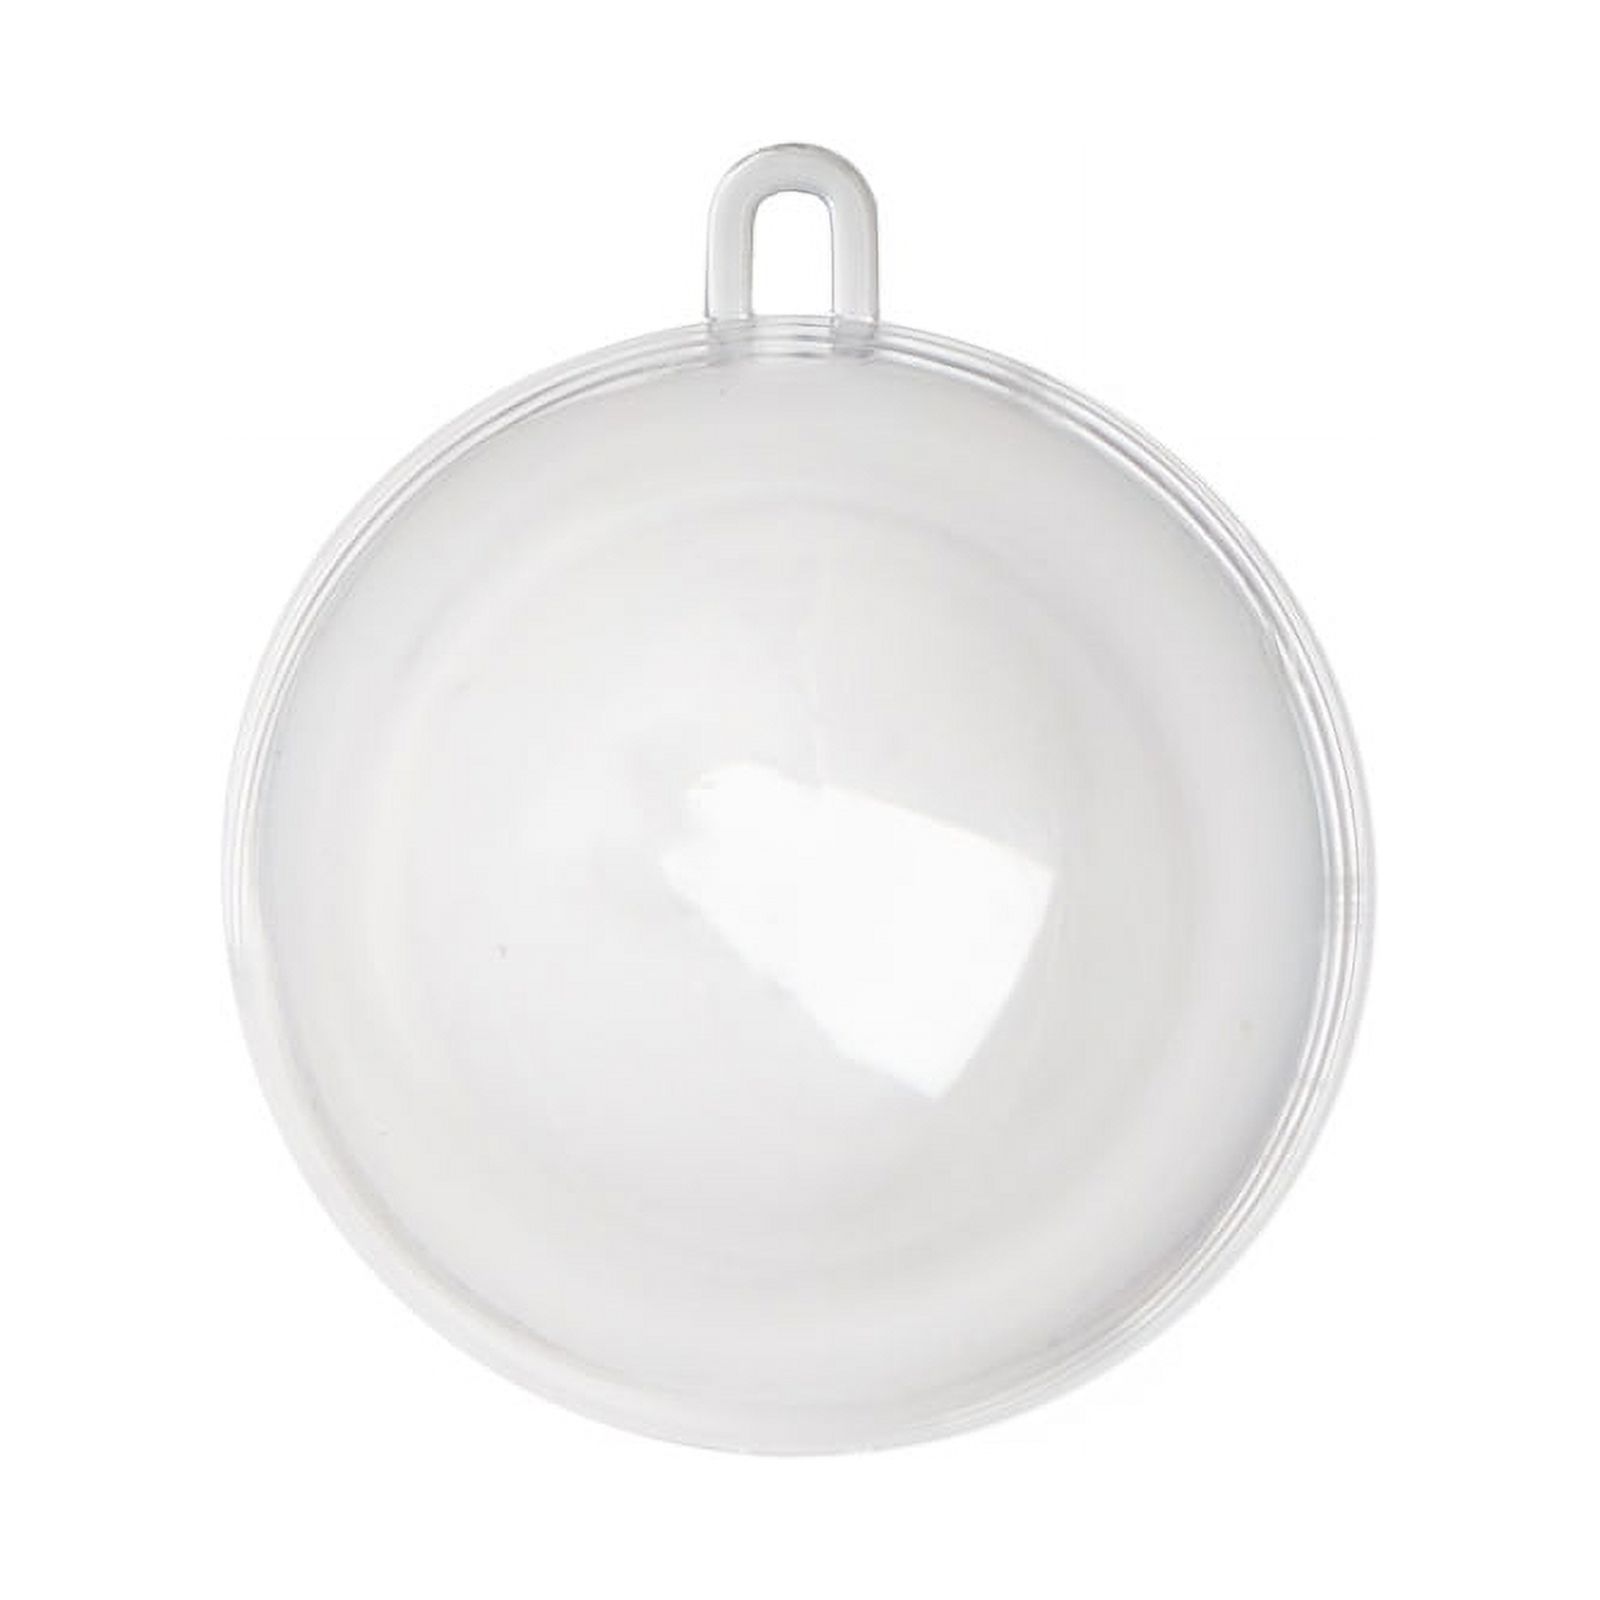 Factory Direct Craft Fillable Clear Plastic Ball Ornaments | 70mm | 6 Pack - image 1 of 3